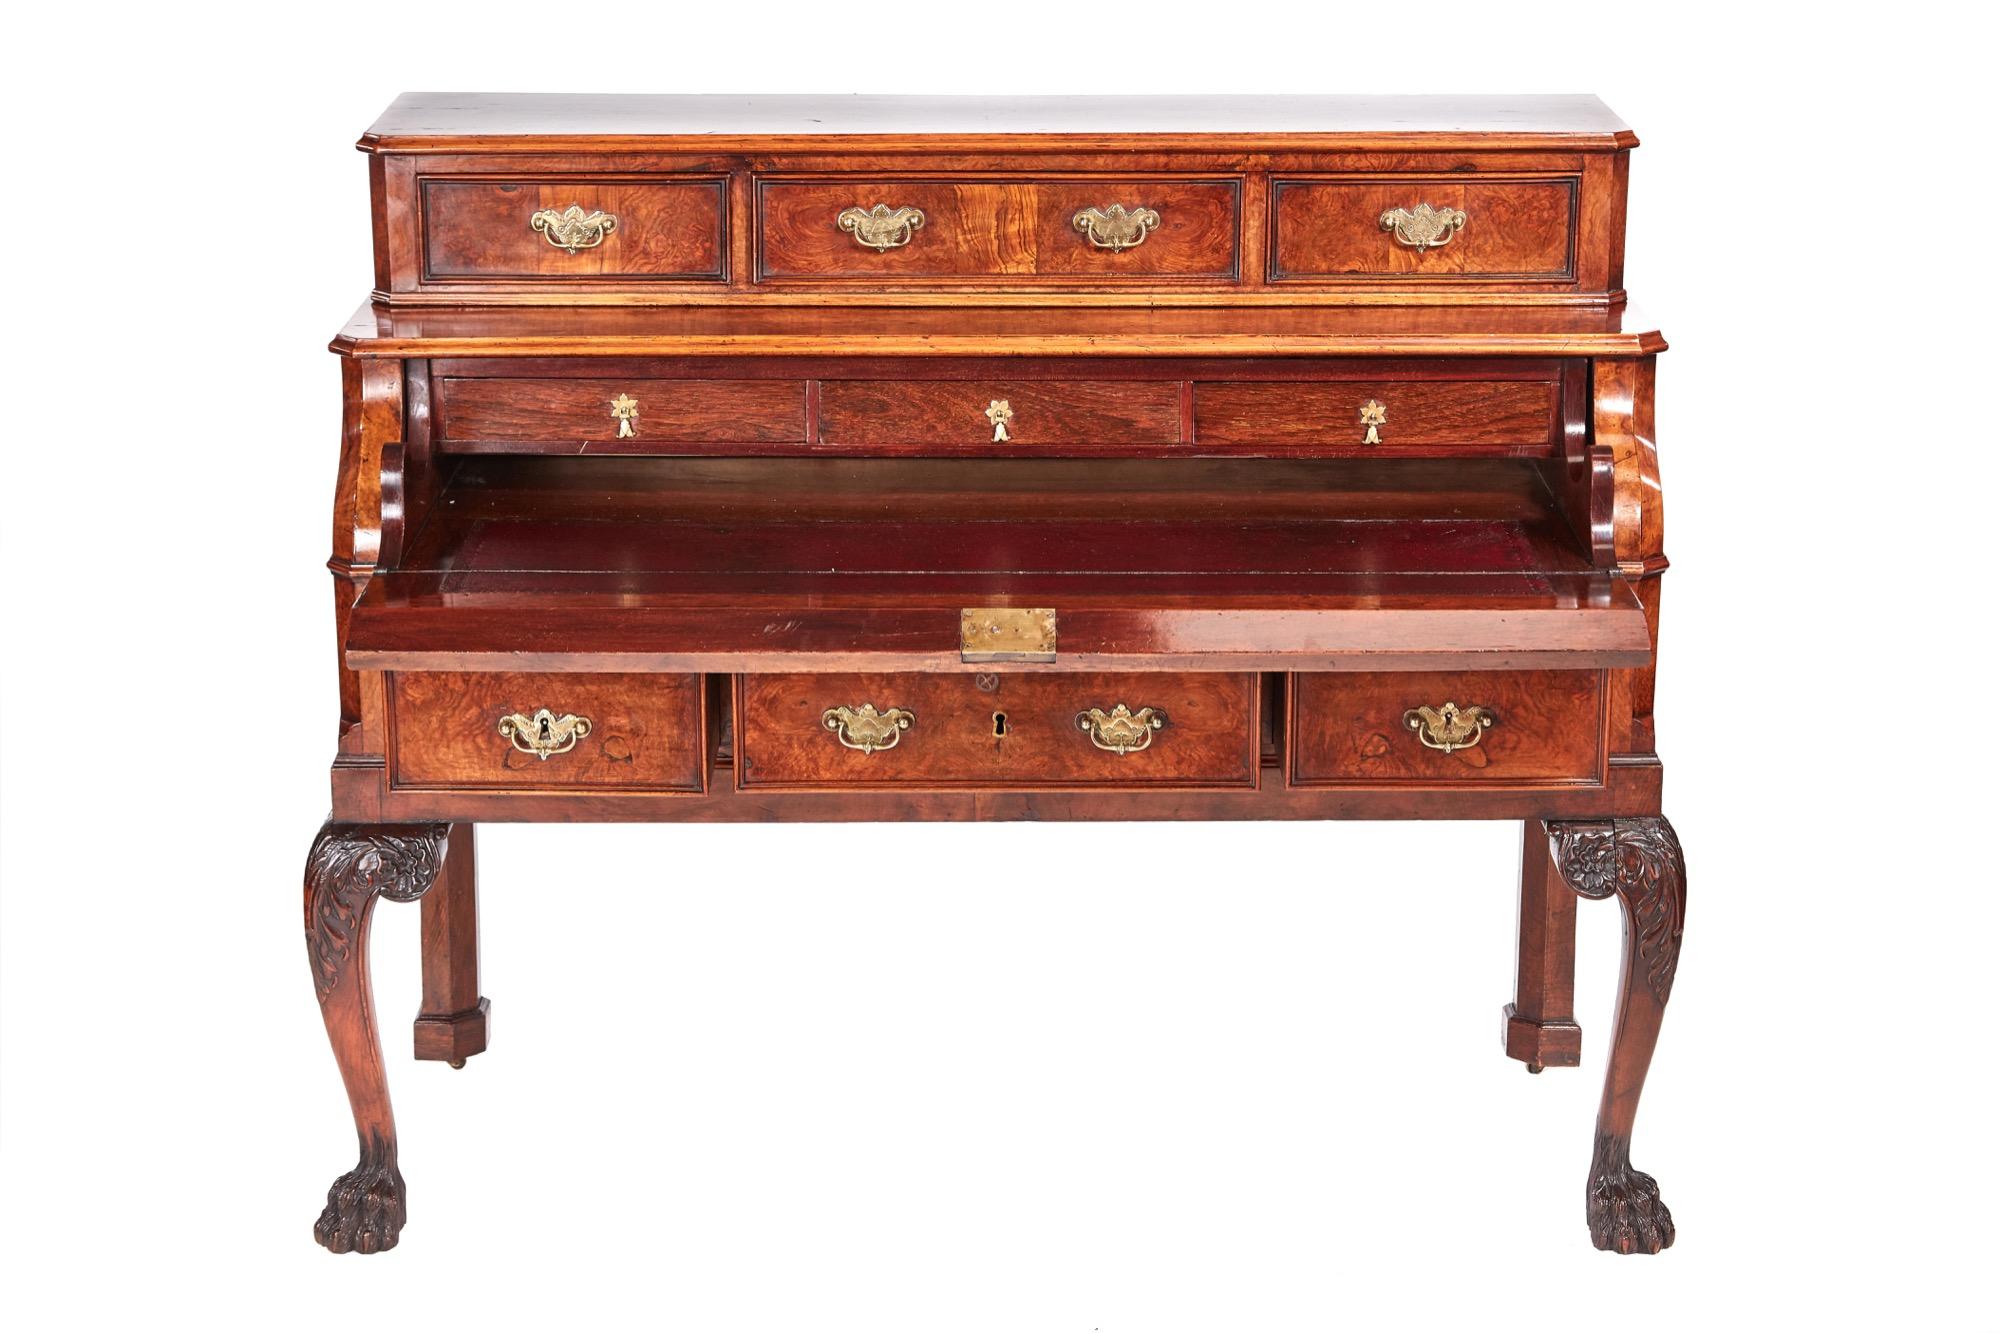 Exceptional quality antique 19th century Victorian burr walnut bureau having three drawers above a beautiful shaped fall enclosing a wonderful fitted exterior with three long drawers and a leather writing surface, a further three drawers beneath all